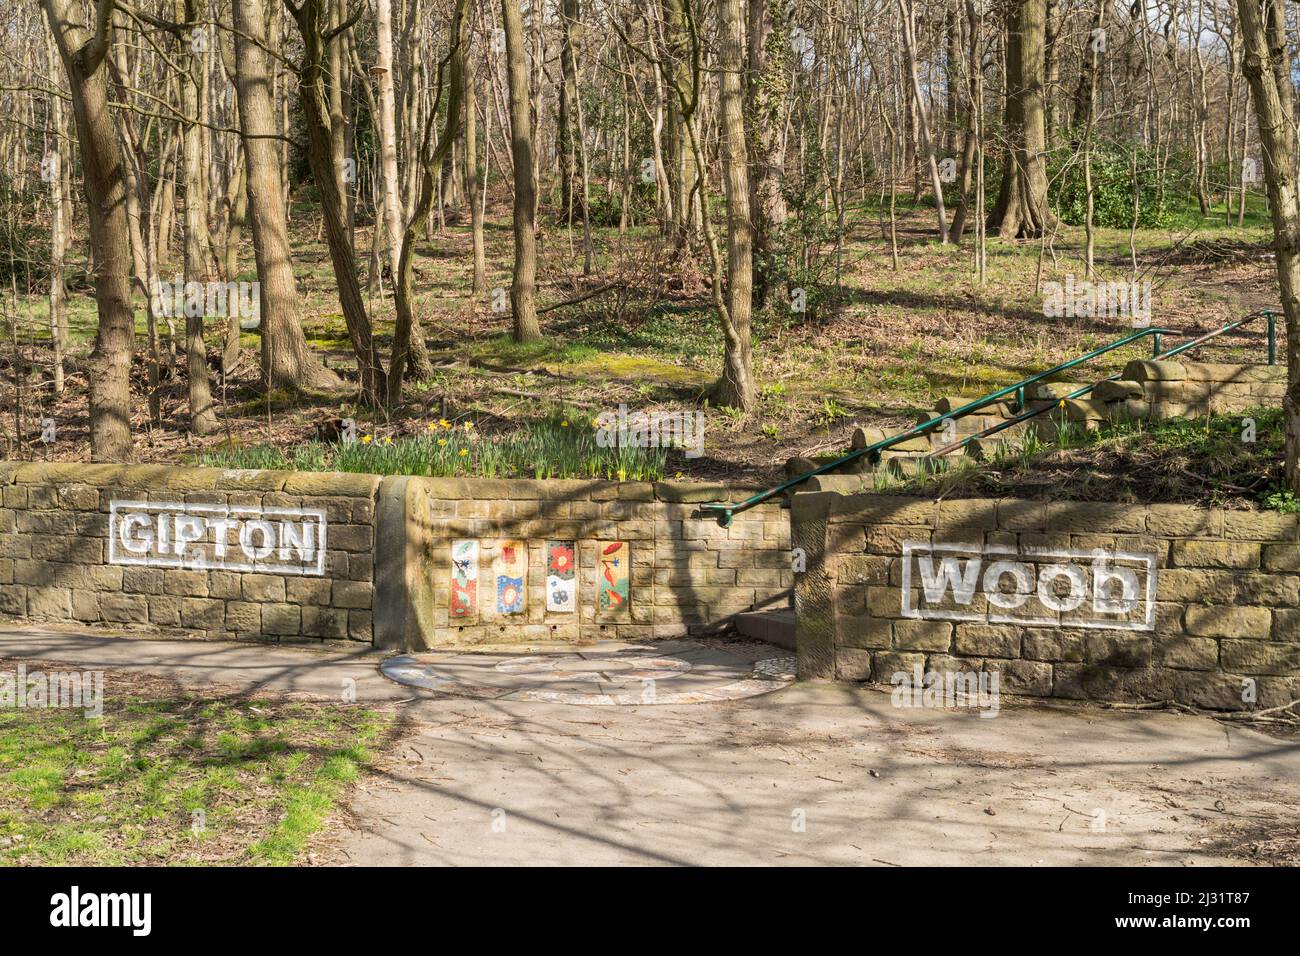 The entrance to Gipton Wood, an ancient woodland site, in Roundhay, Leeds, Yorkshire, England, UK Stock Photo